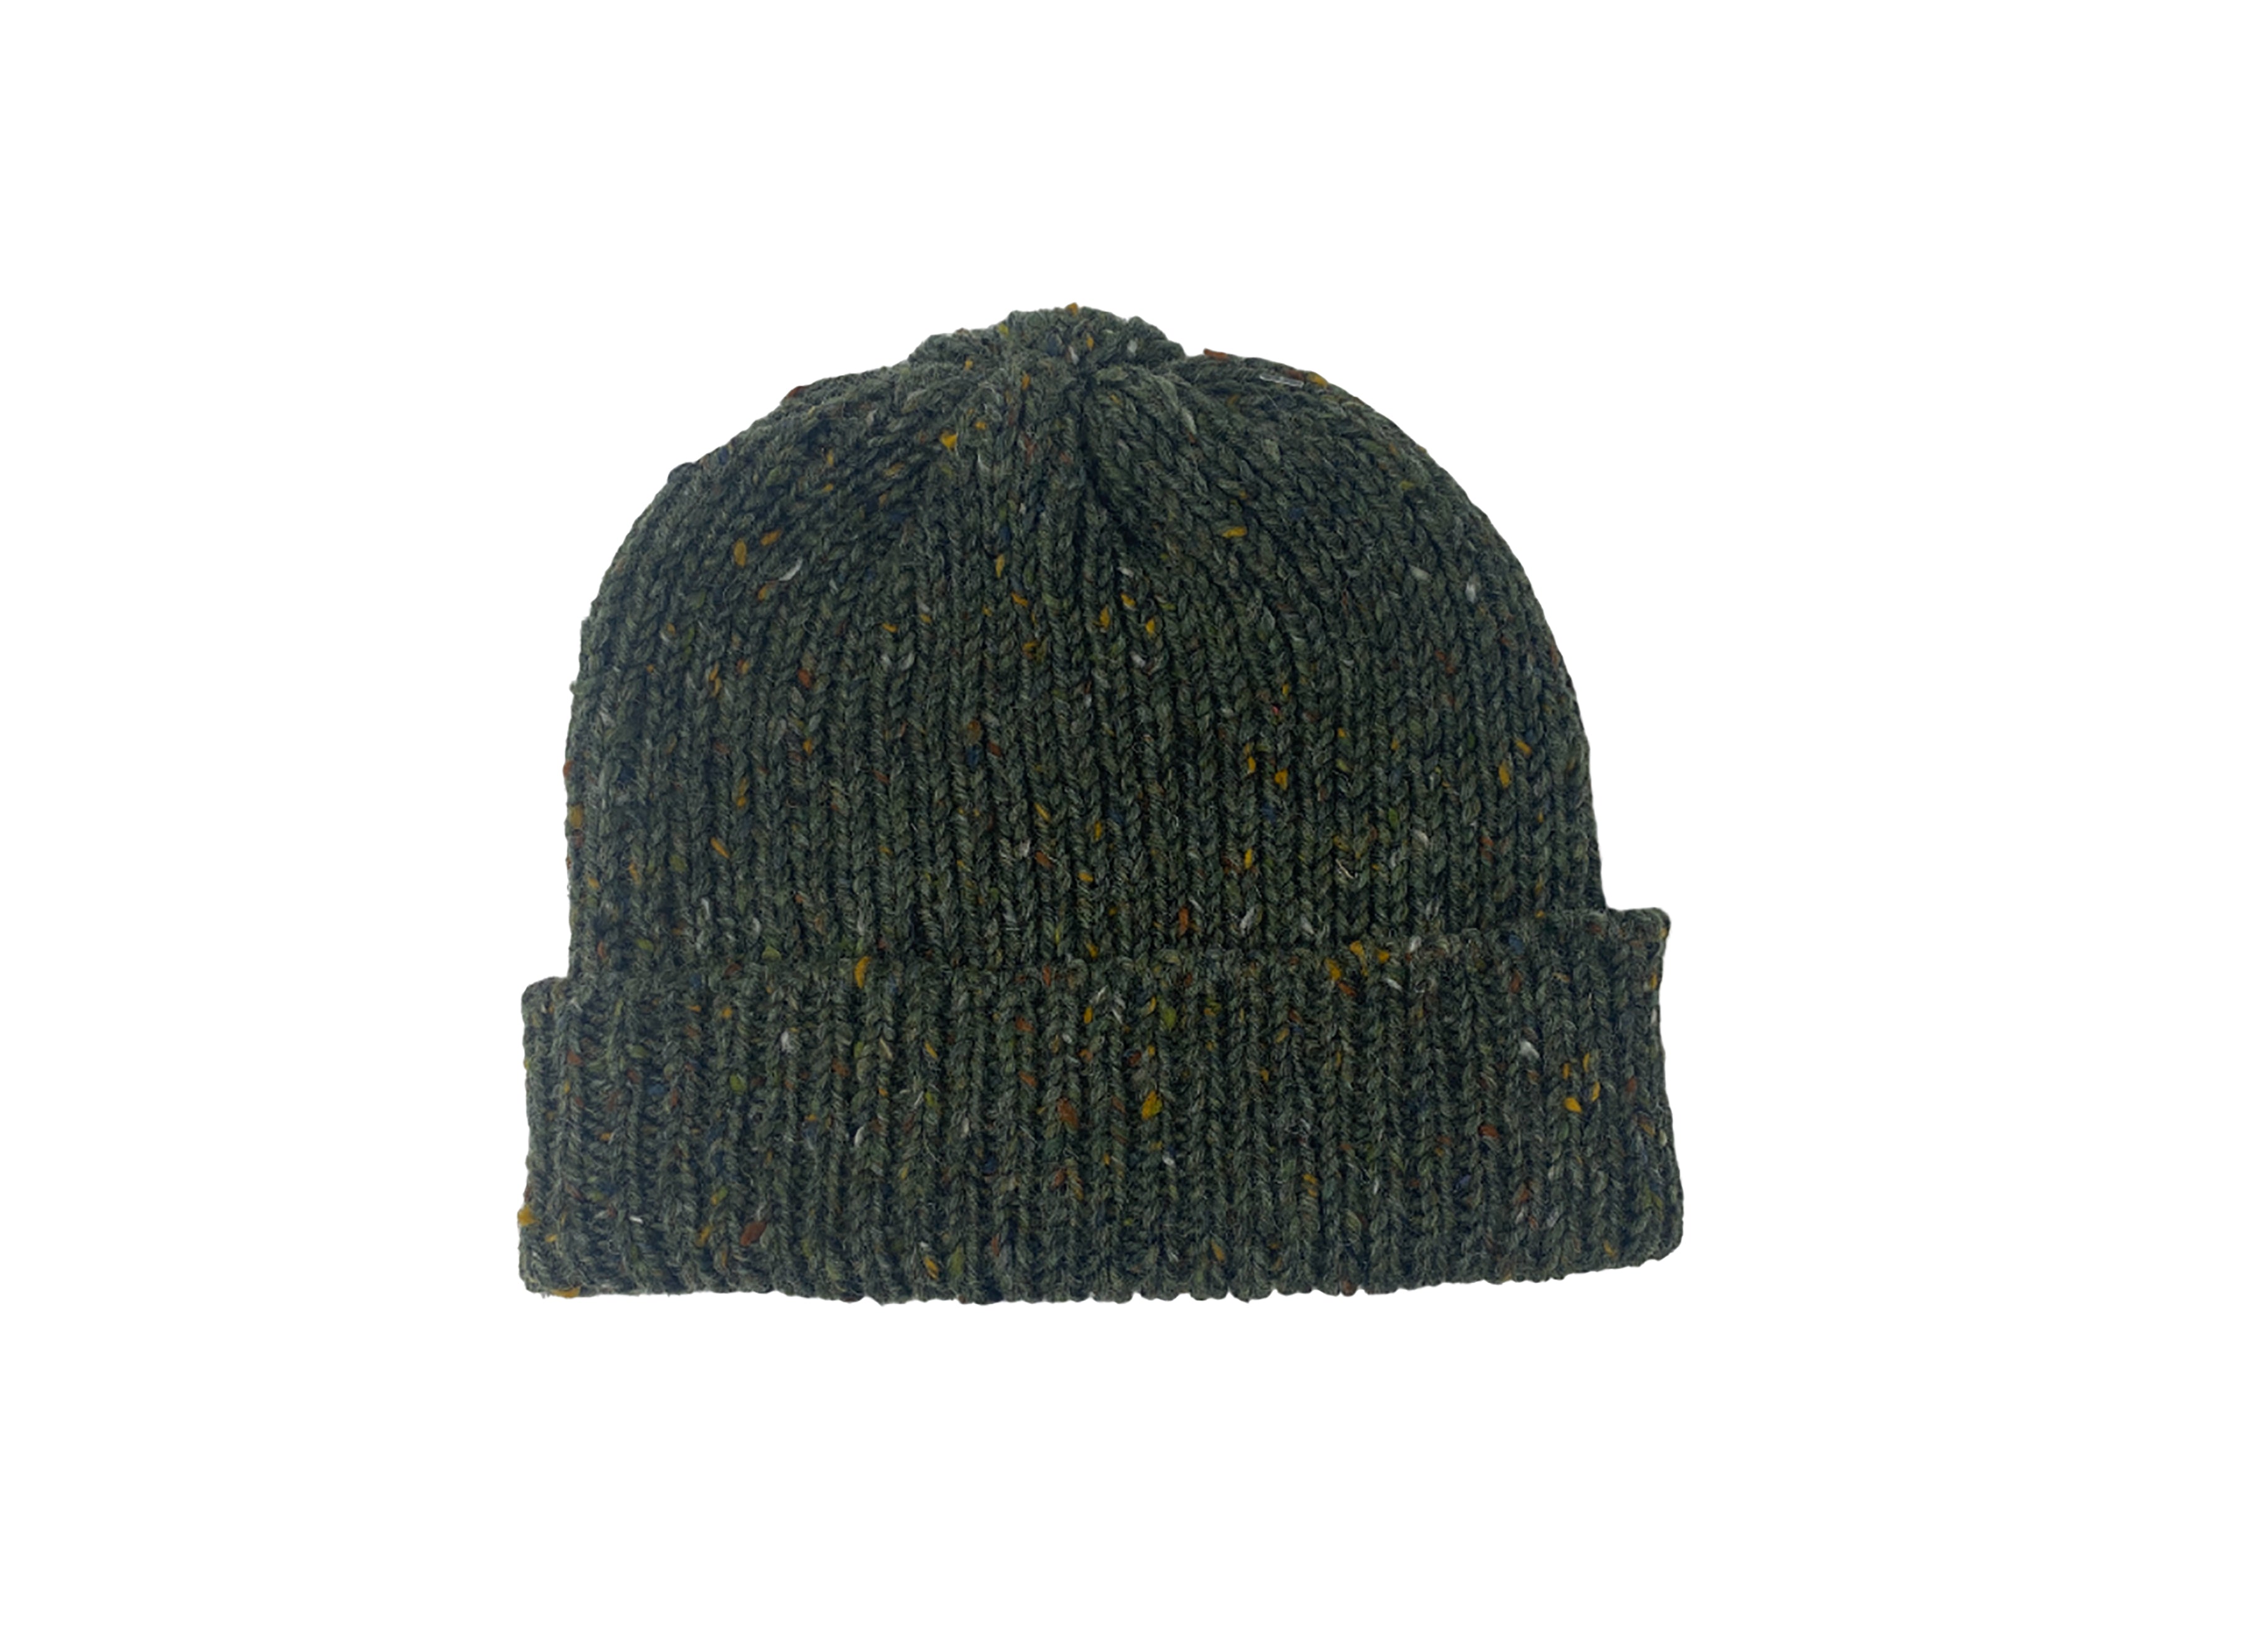 Donegal Beanies